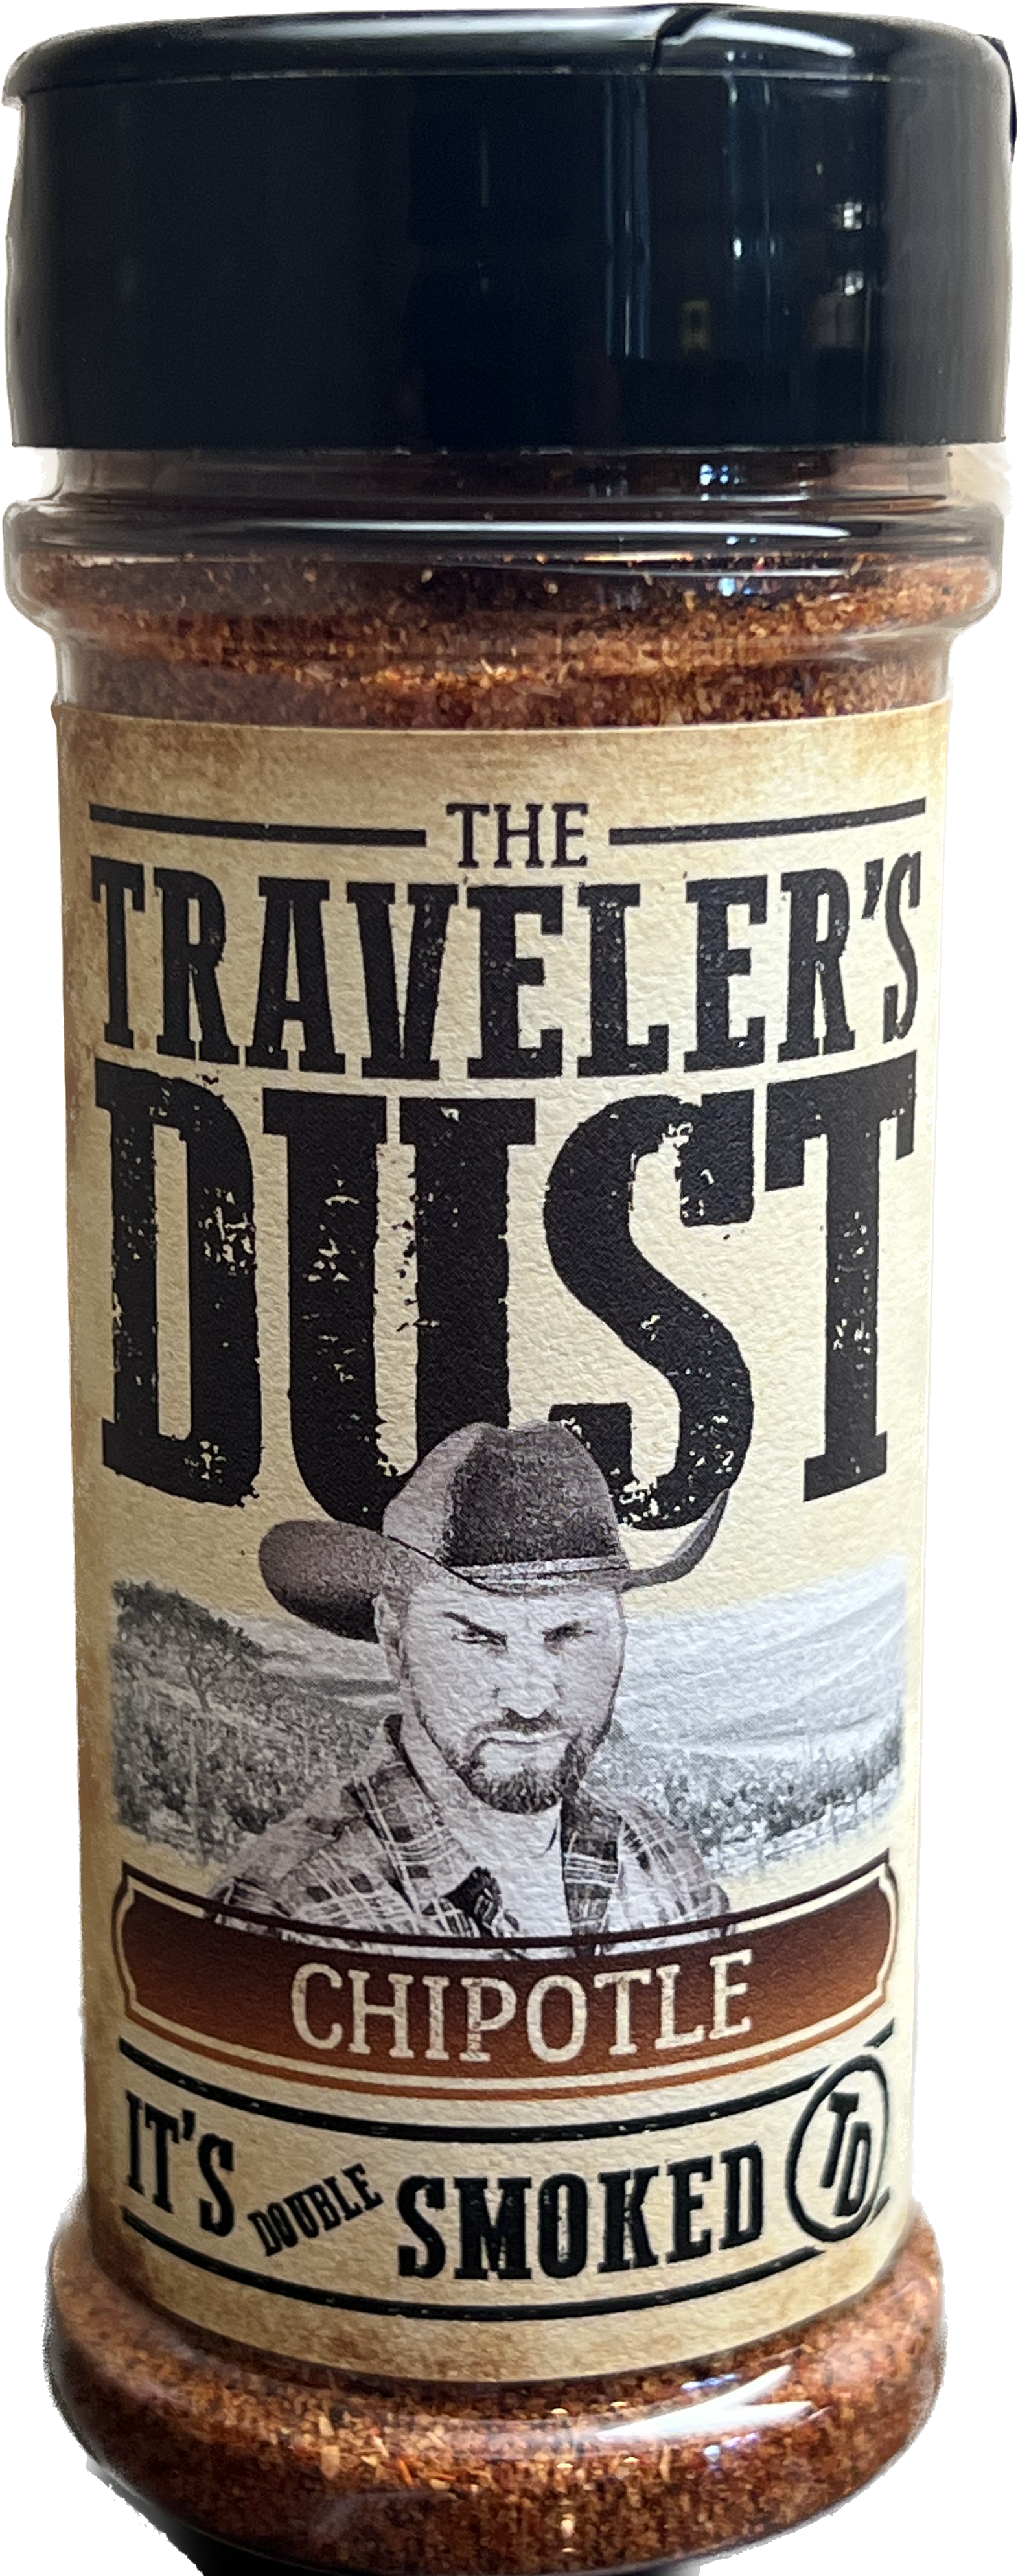 The Traveler’s DUST | Chipotle                        -       It’s Double Smoked